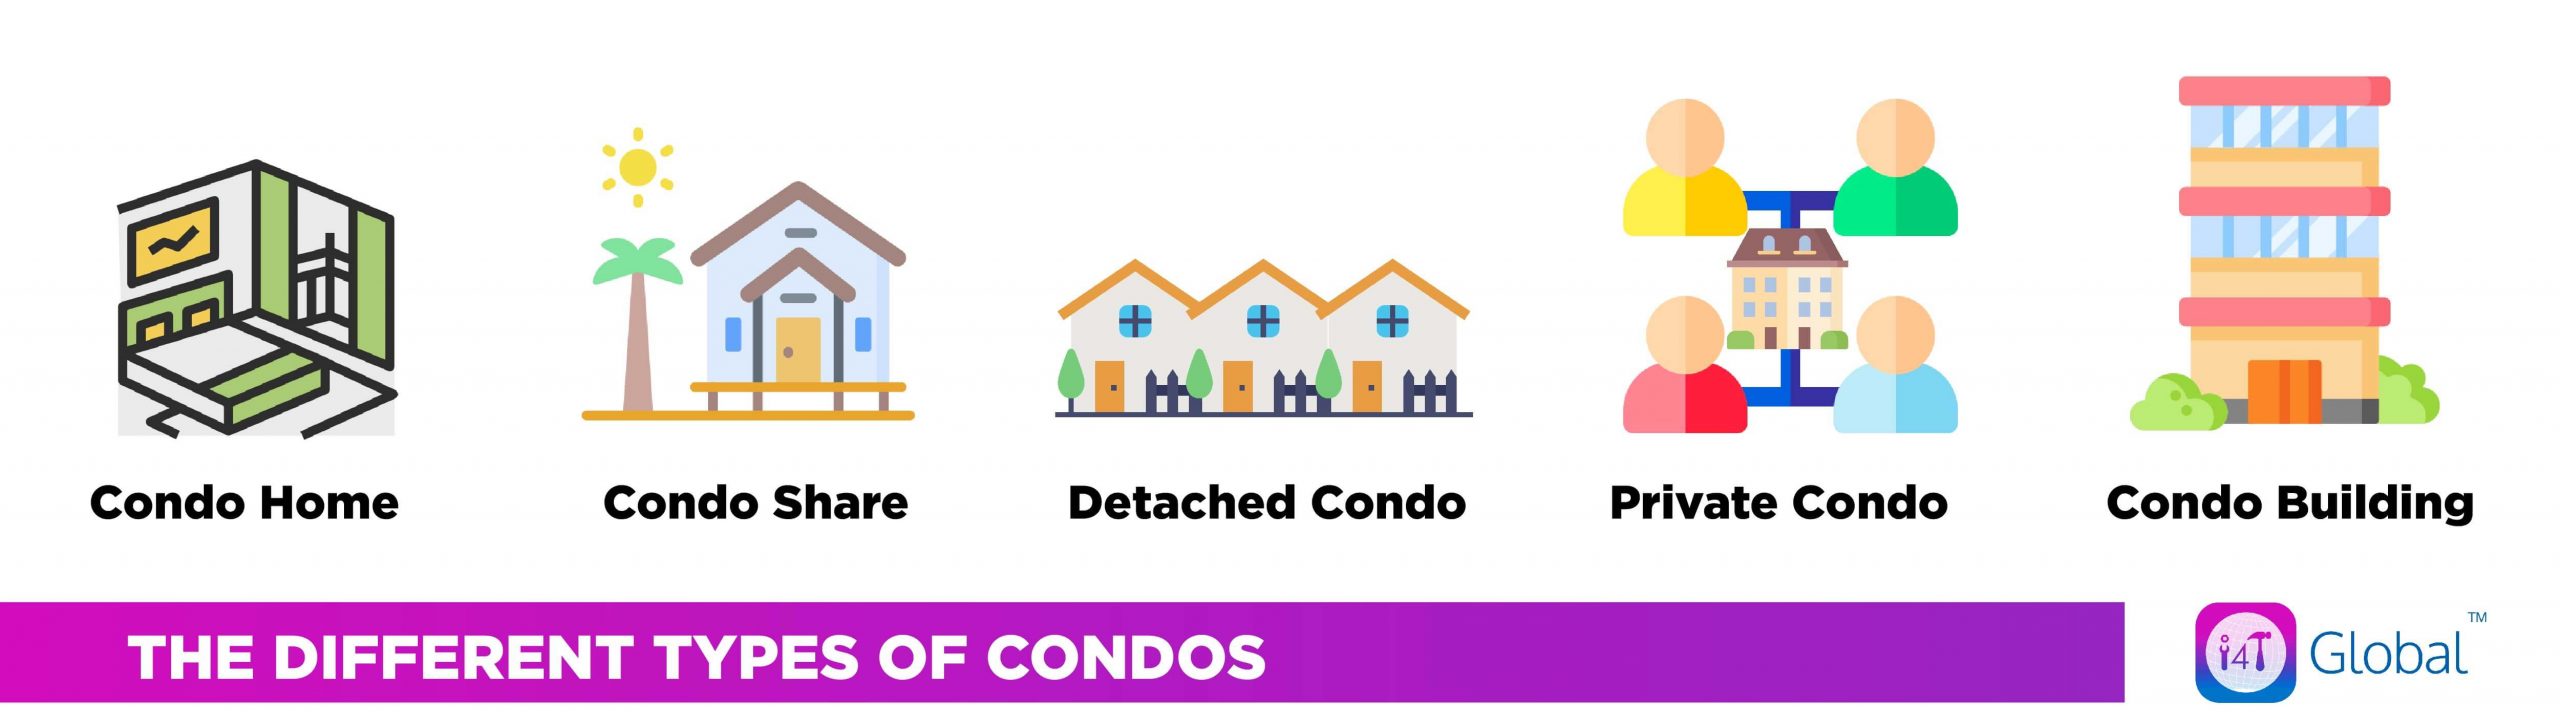 Types of condos - i4T Global